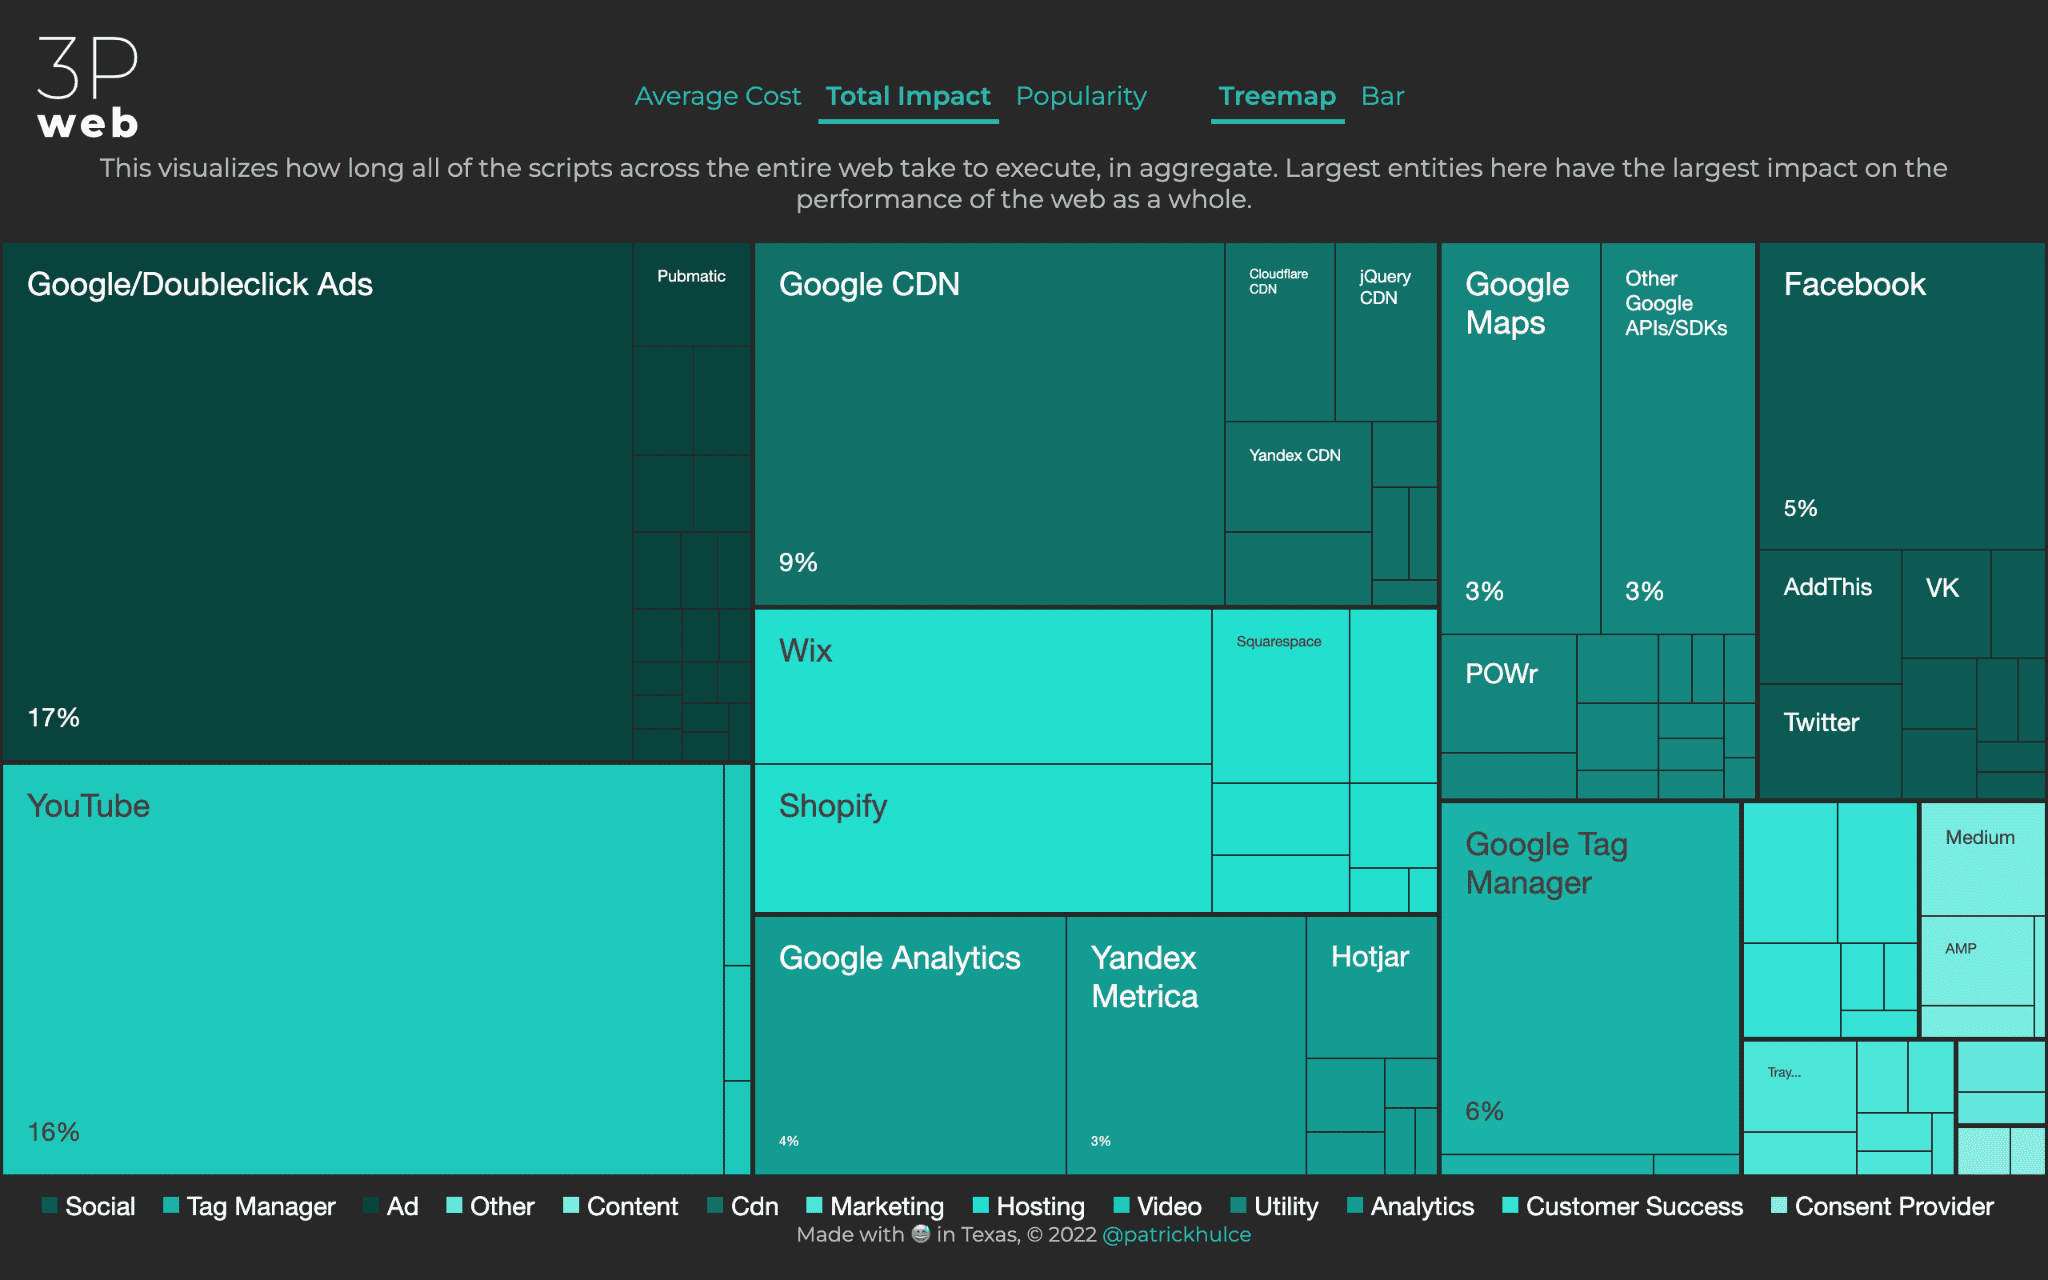 Third Party Web visualization